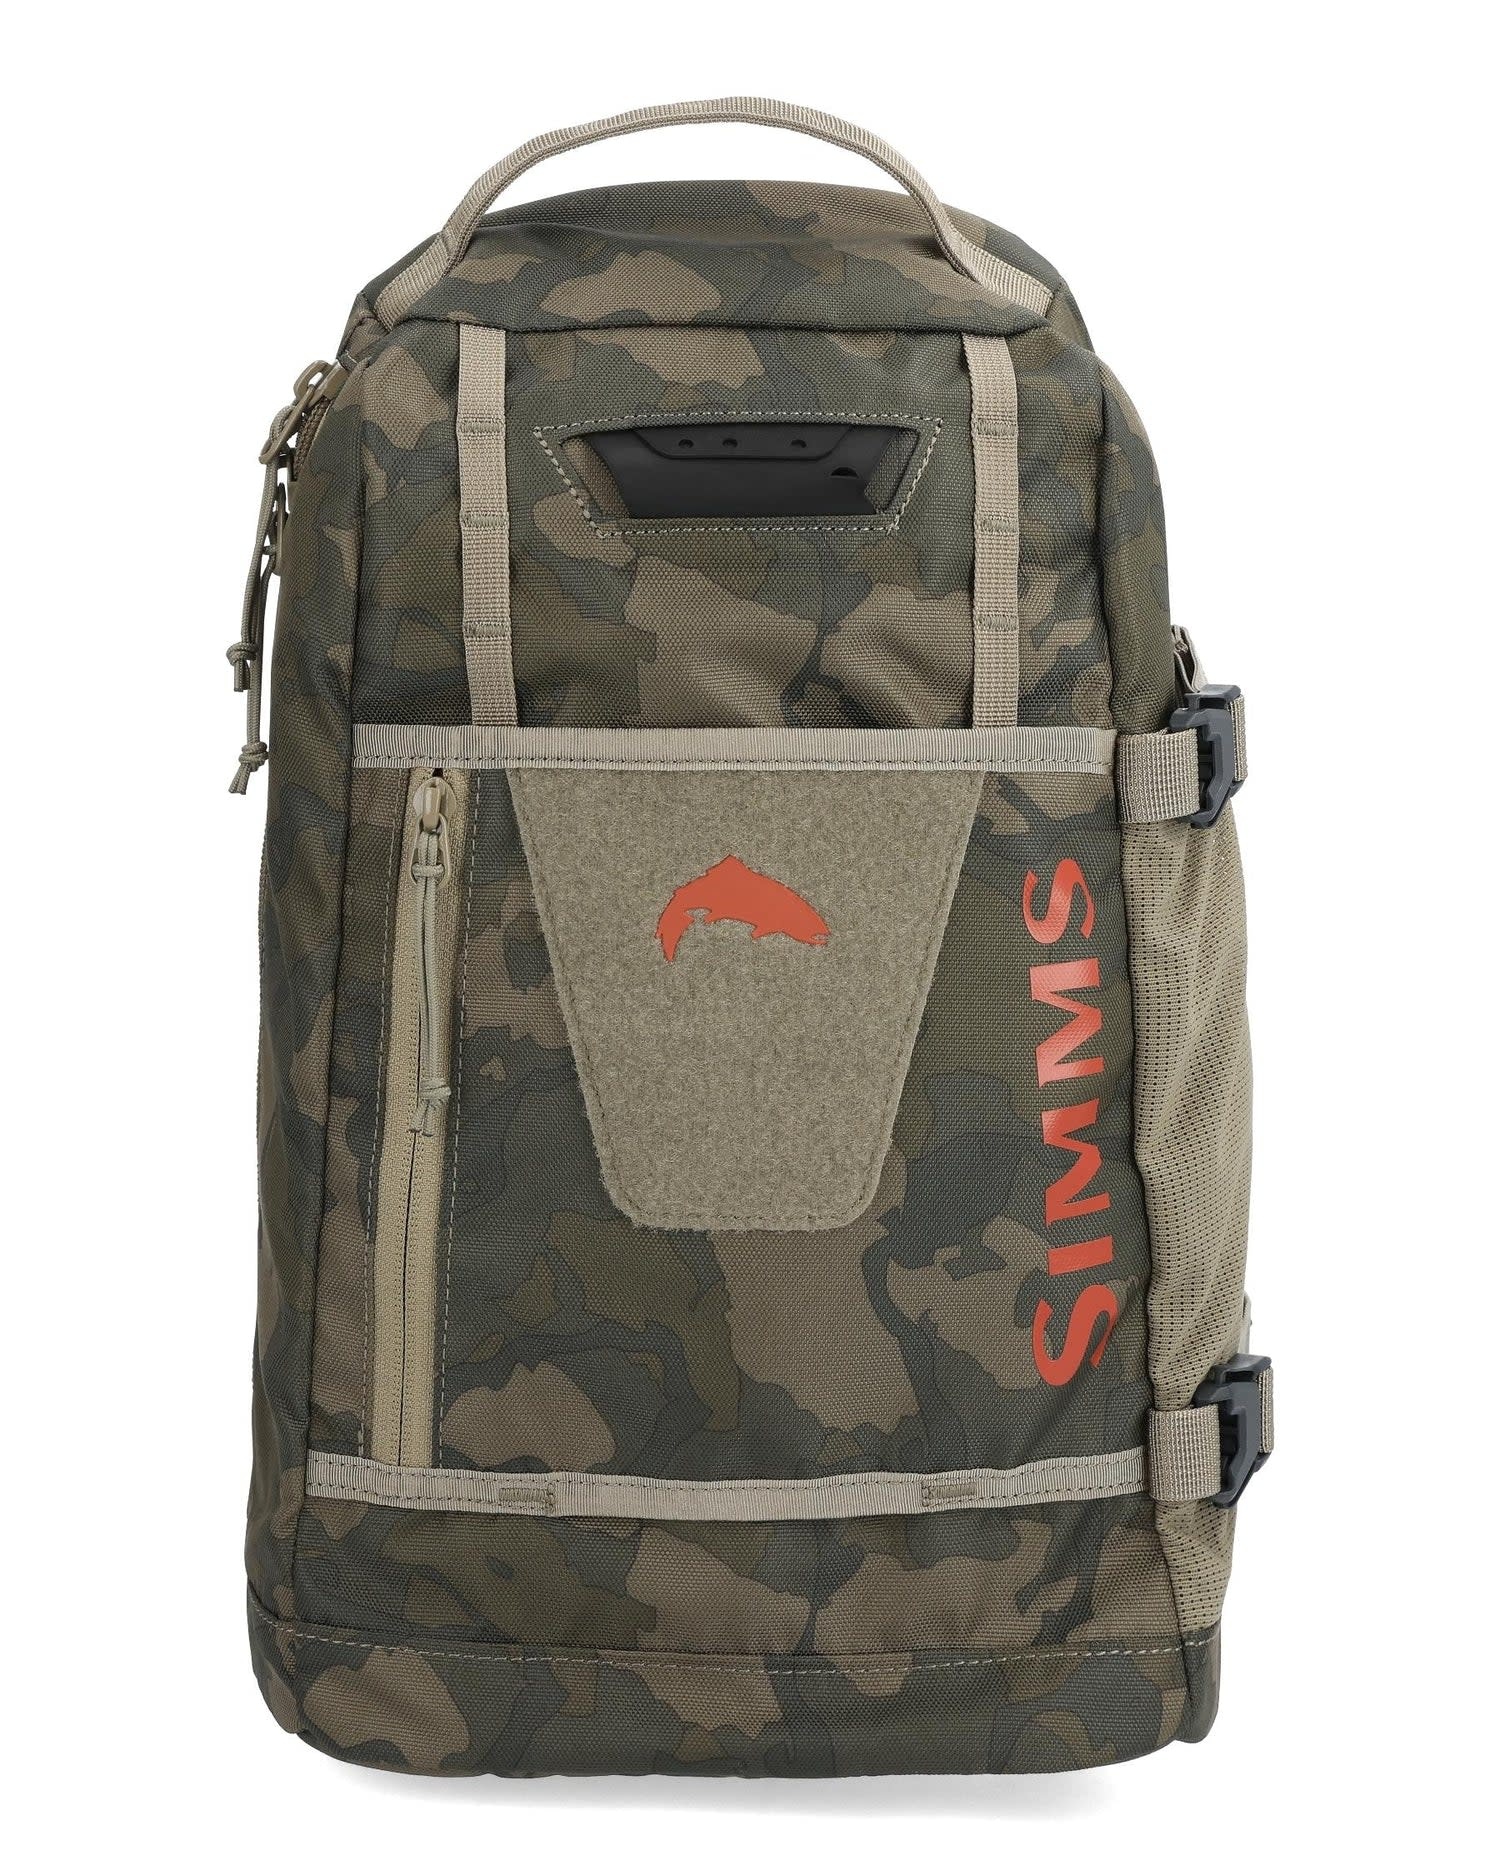 Simms Tributary Sling Pack. Regiment Camo Olive Drab - Gagnon